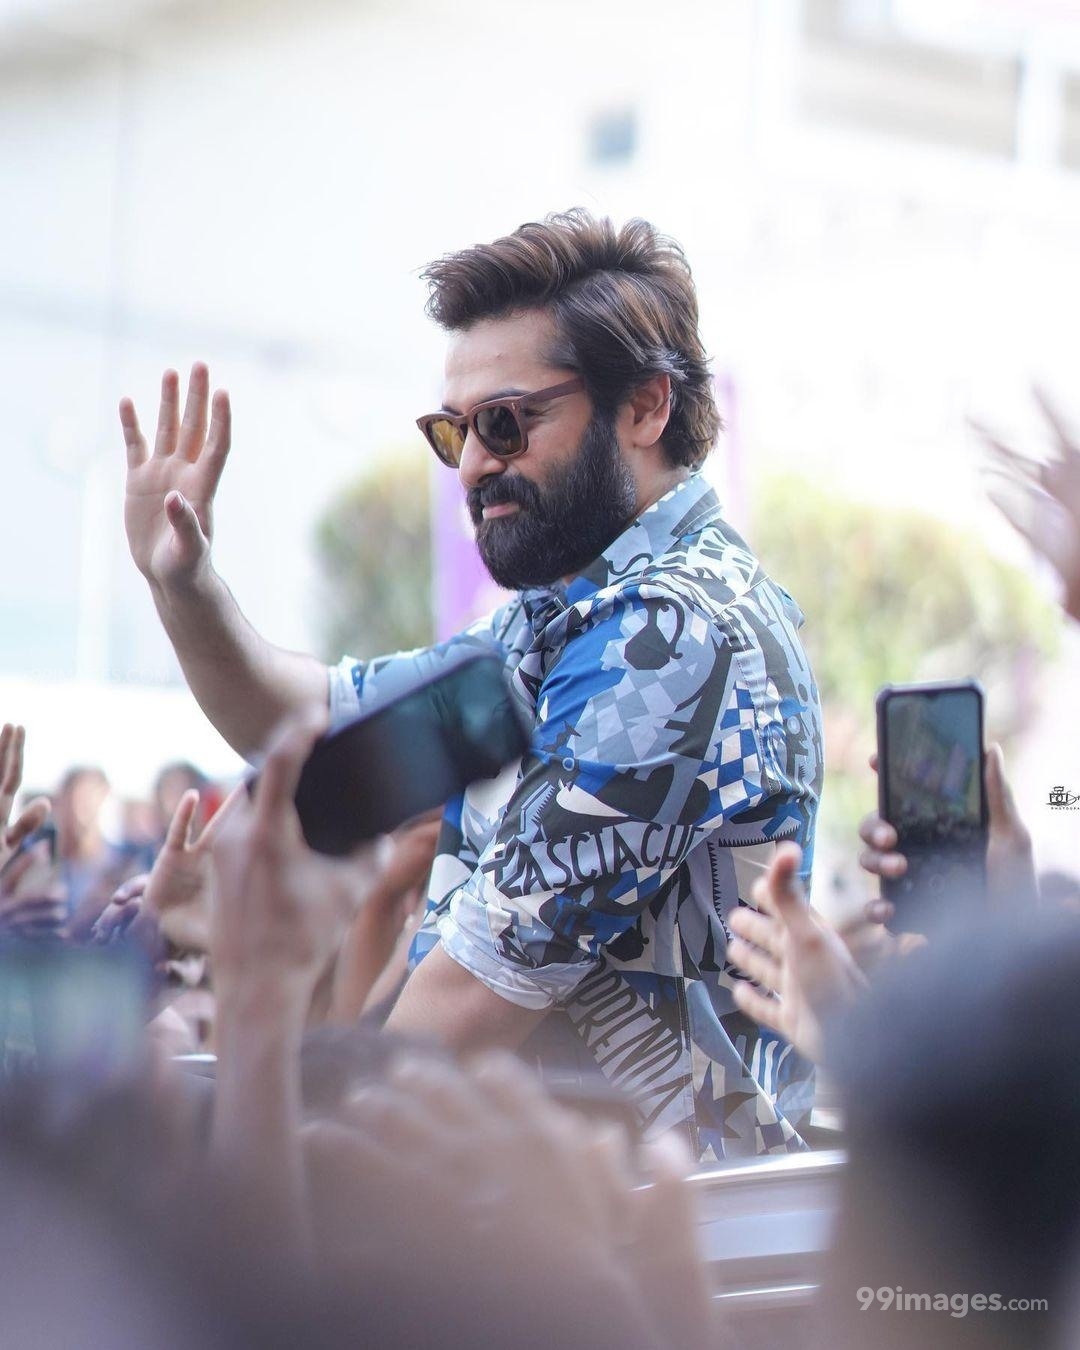 ✓[150+] Ram Pothineni Images, HD Photos (1080p), Wallpapers  (Android/iPhone) (2023)